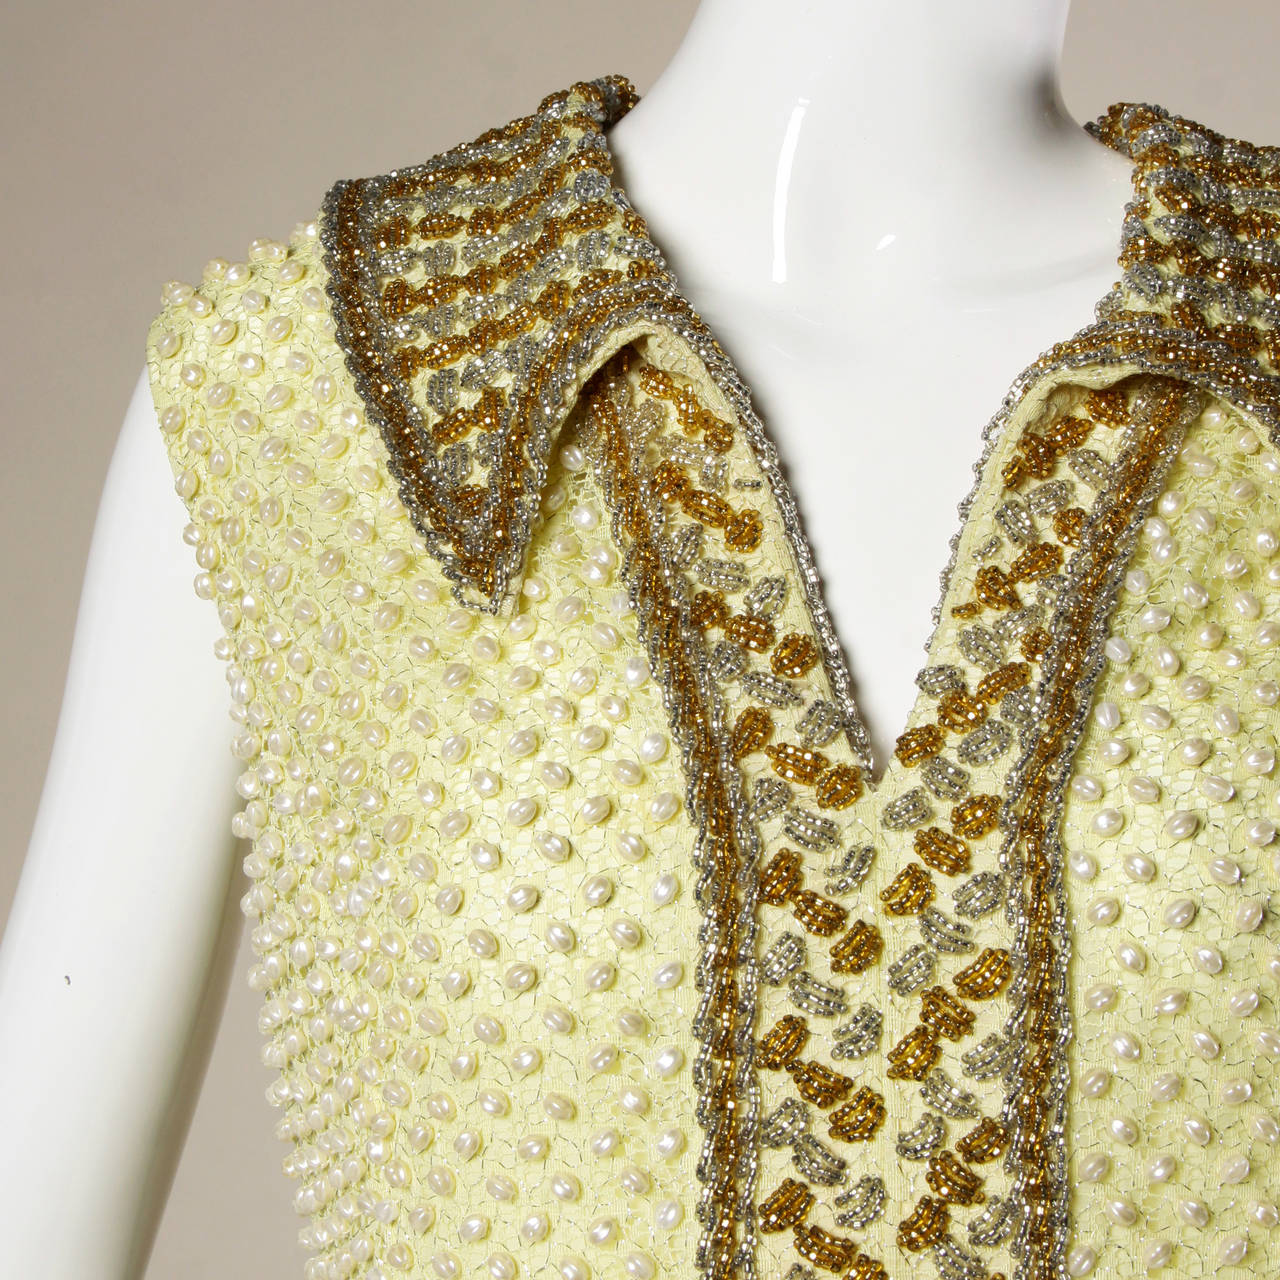 Pastel yellow lace shift dress entirely encrusted in tiny pearl beads. Structured beaded collar and sleeveless sleeves.

Details:

Fully Lined
Back Metal Zip and Hook Closure
Marked Size: Not Marked
Estimated Size: Medium
Color: Iridescent